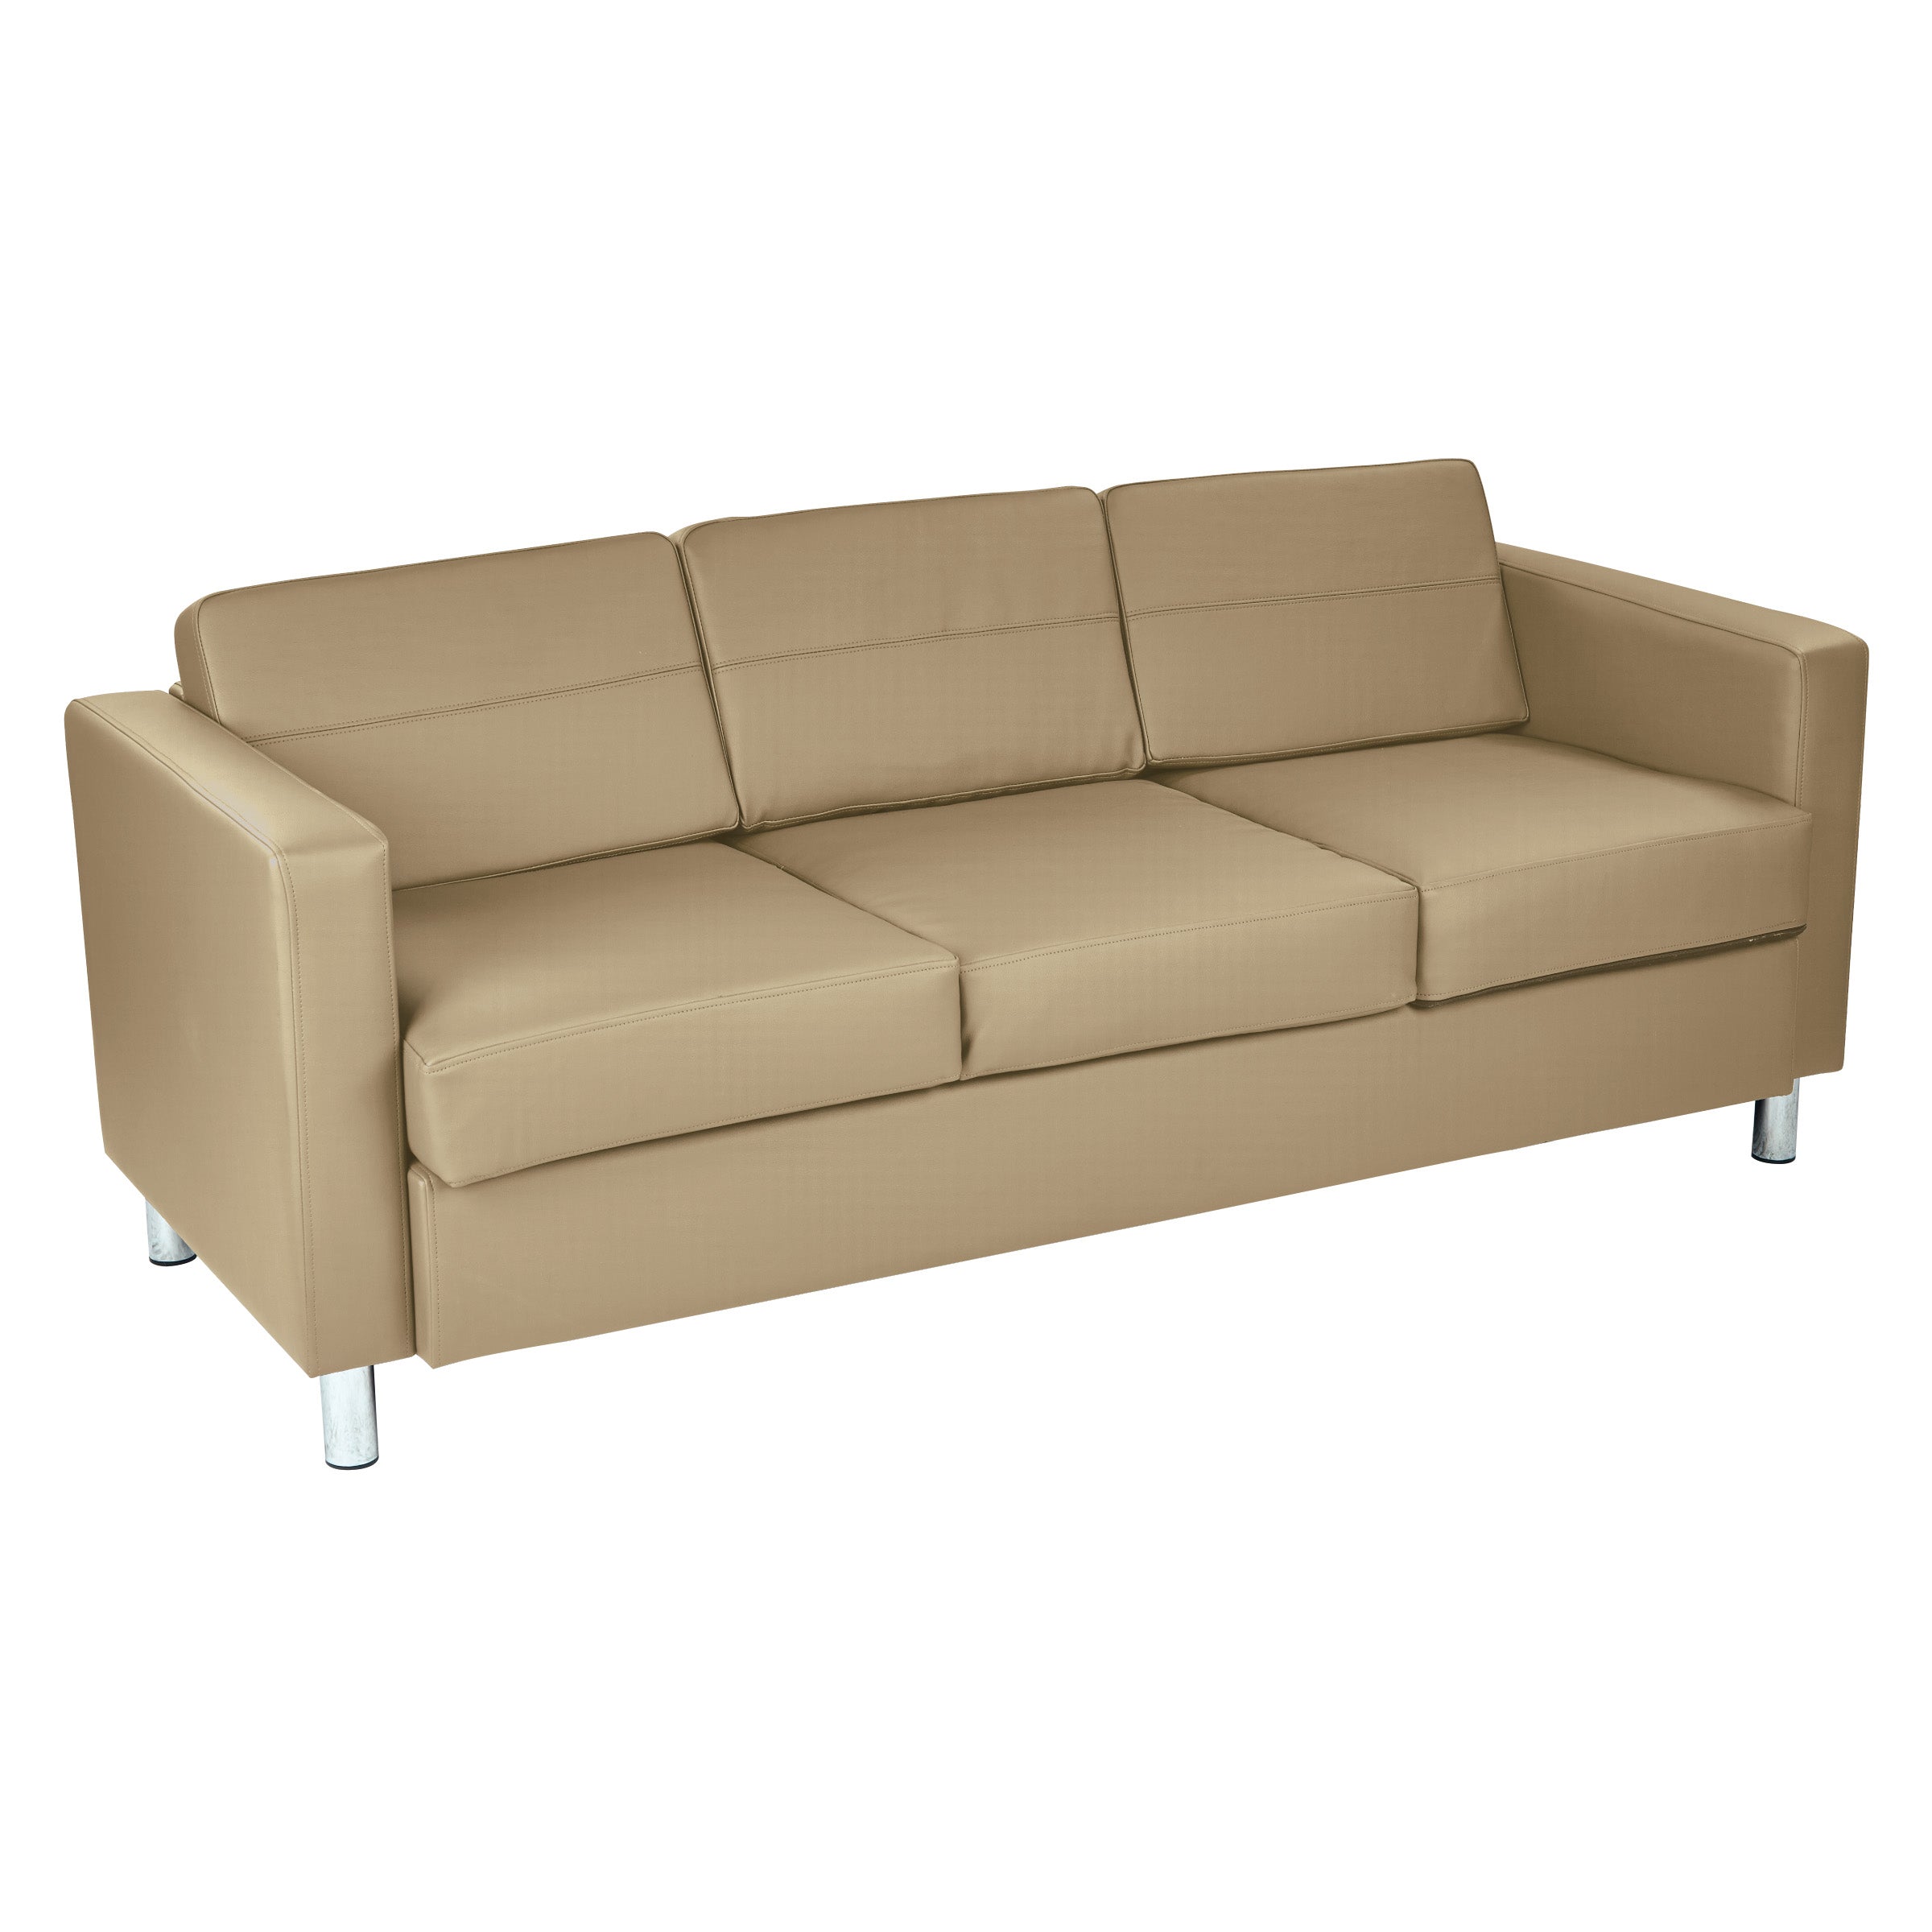 PAC53-D - Pacific Dillon Antimicrobial Sofa with Chrome Finish Legs by Office Star